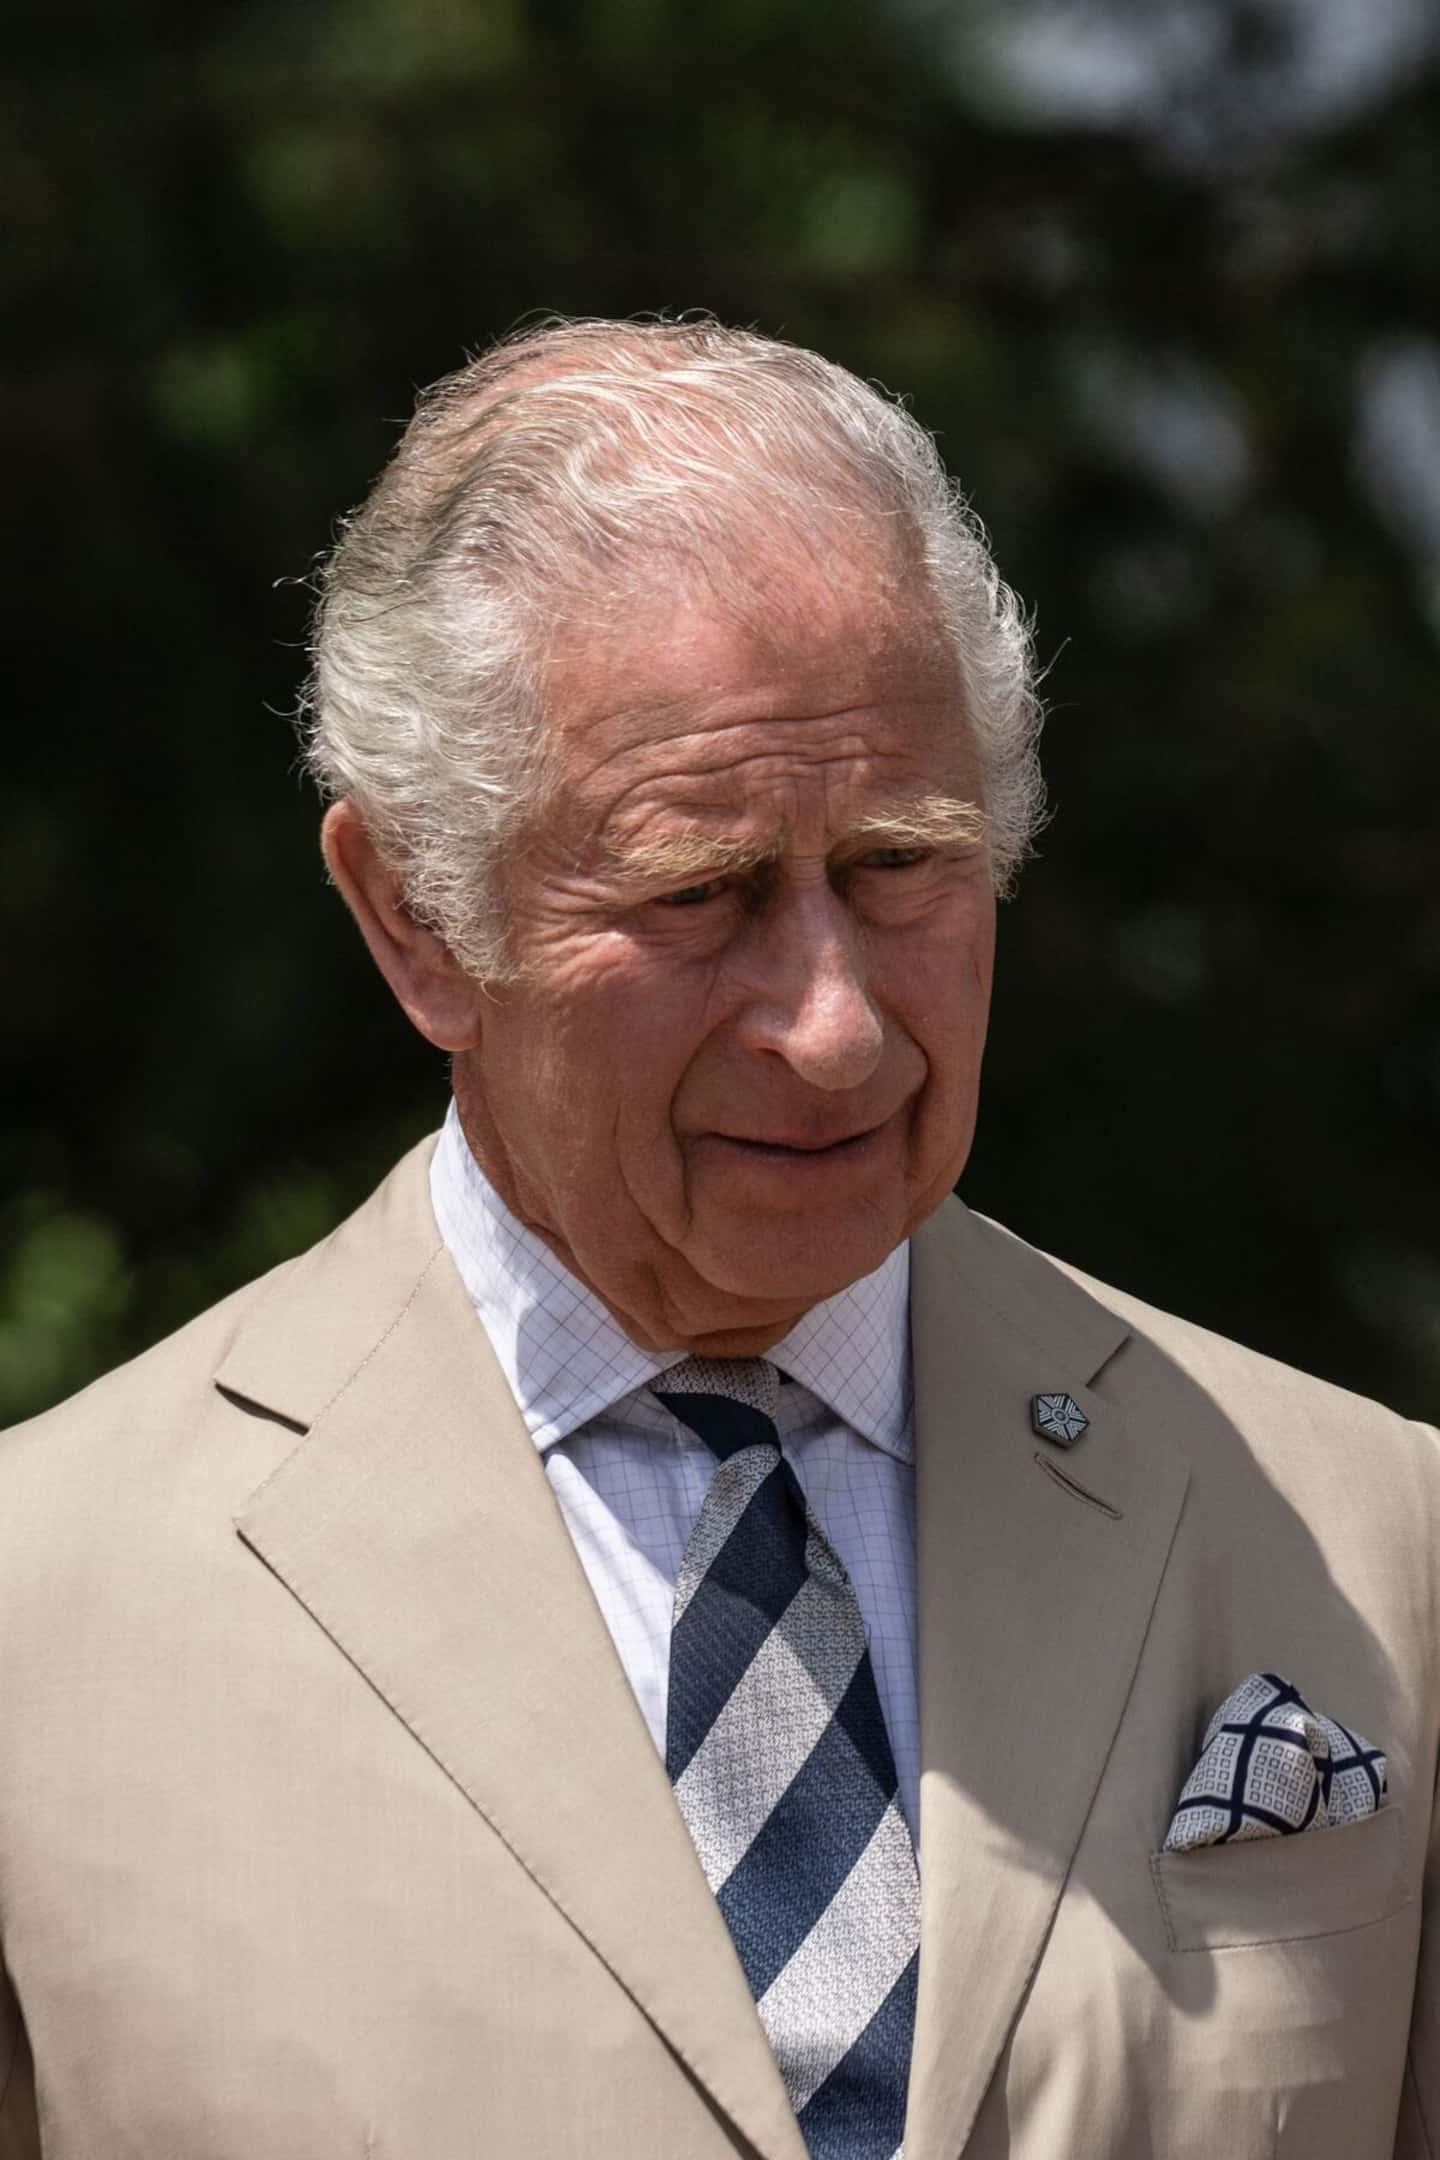 Prince Charles would have accepted a suitcase with a million euros from the Qatari sheikh